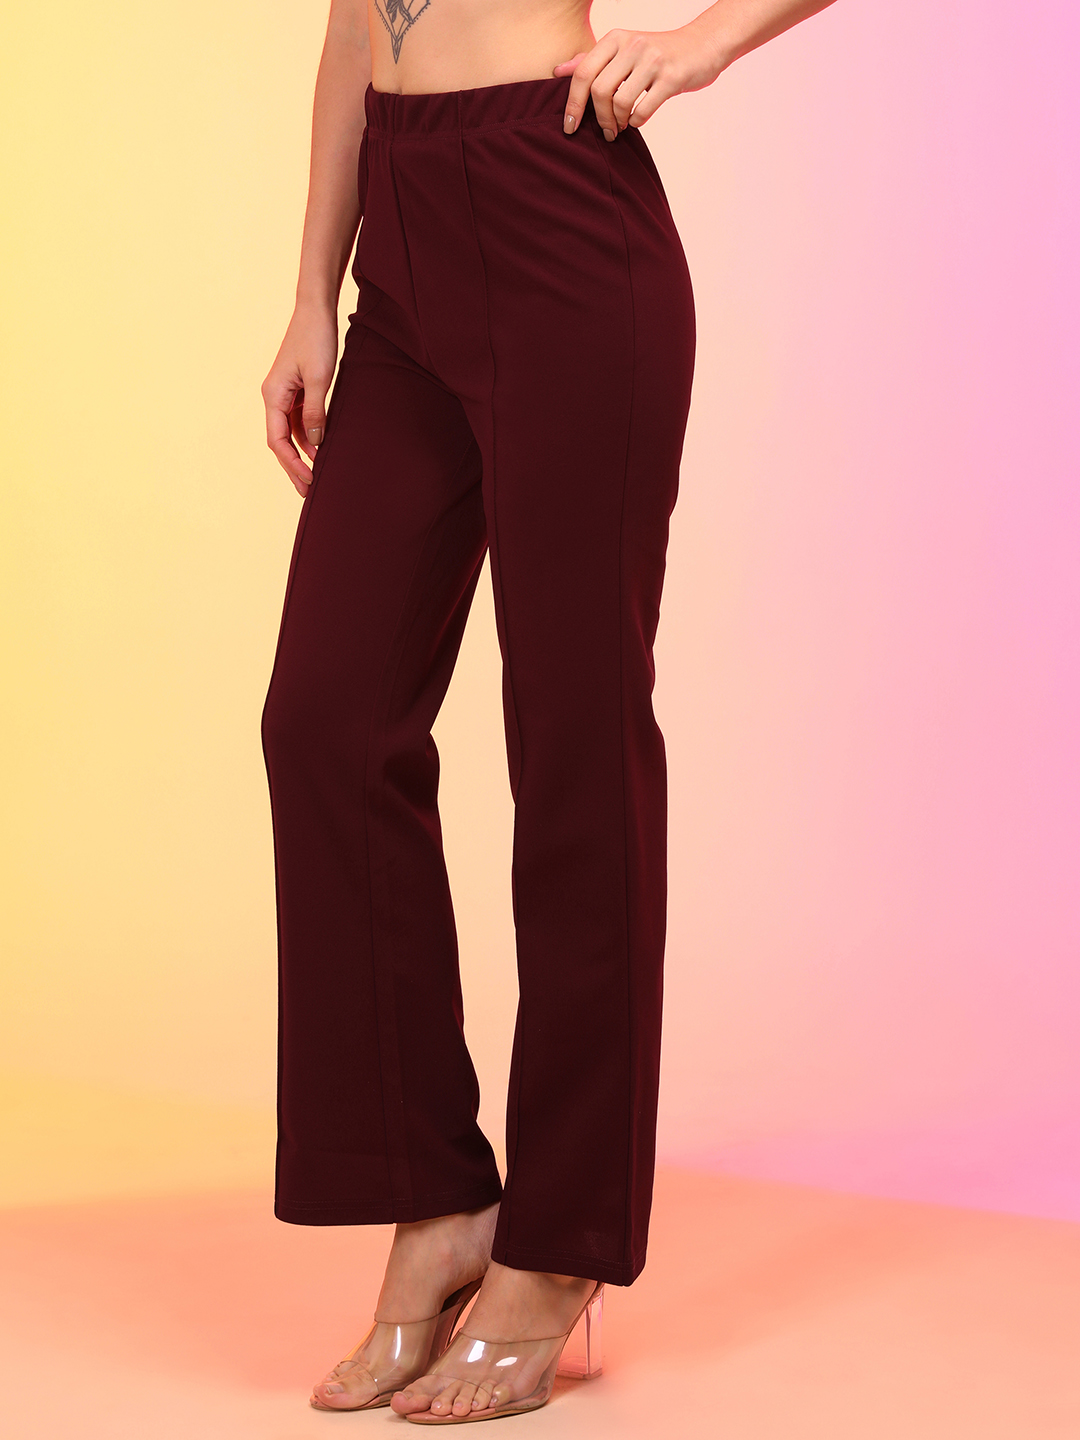 Globus Women Maroon High-Rise Flat Front Bootcut Trousers